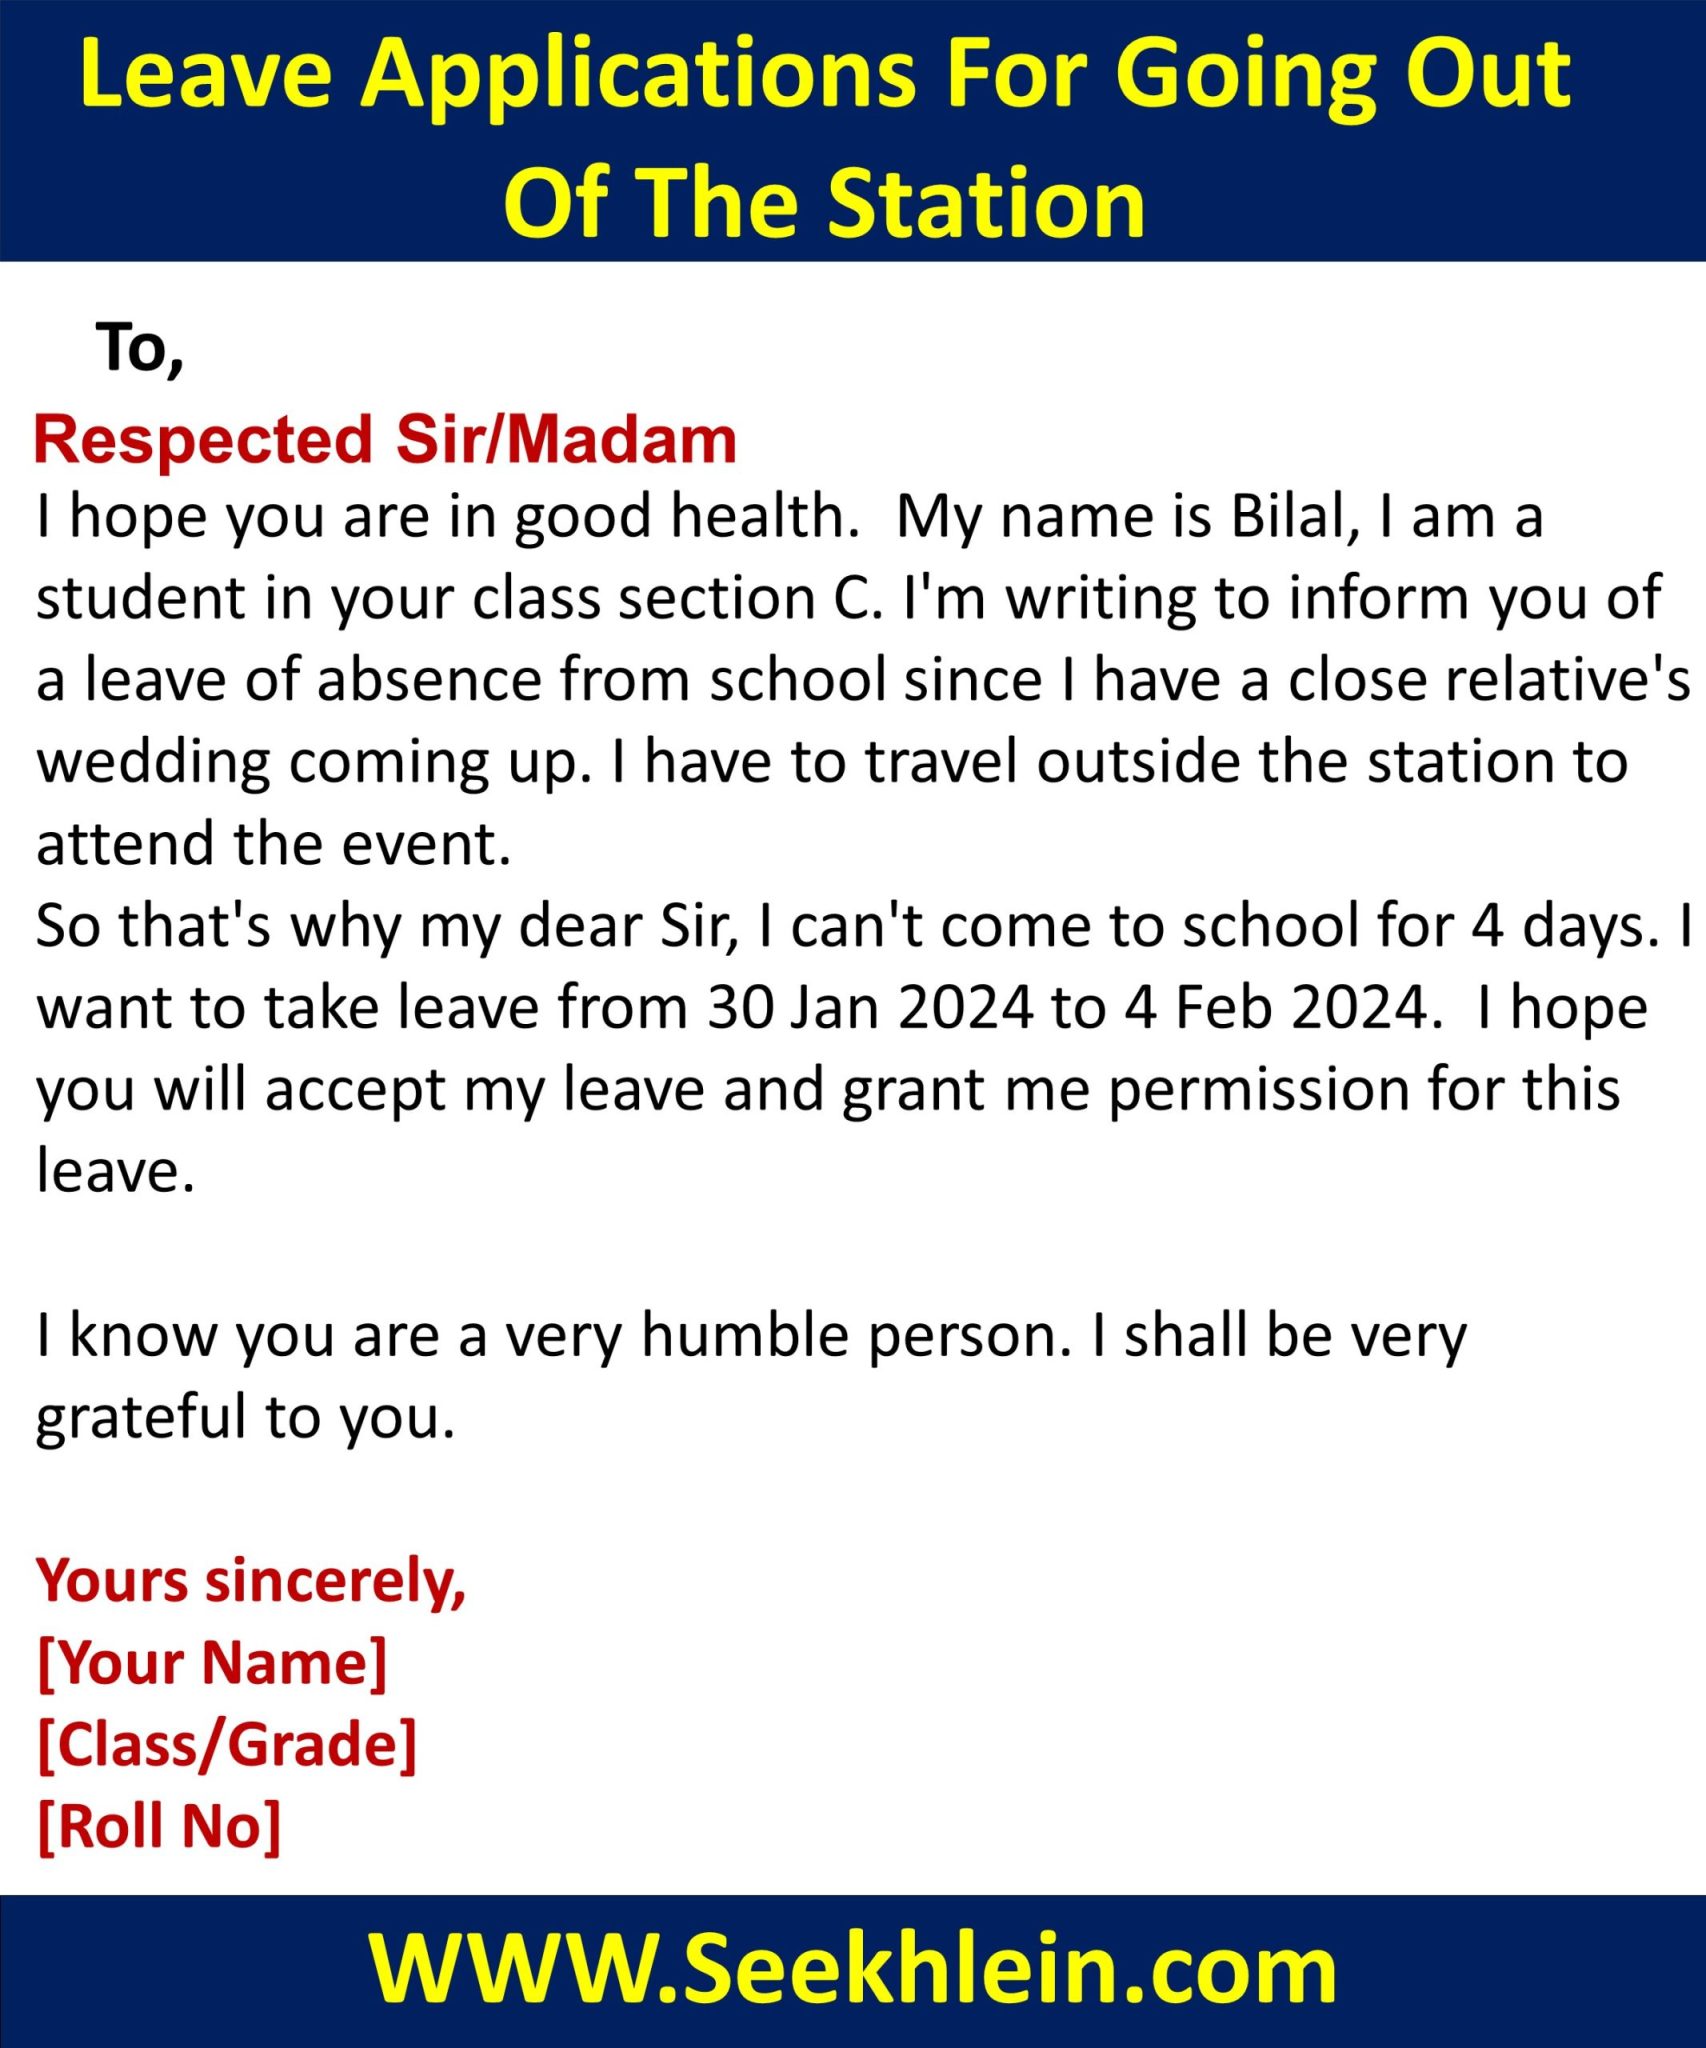 Leave Application To Principal For Going Out Of Station For Marriage